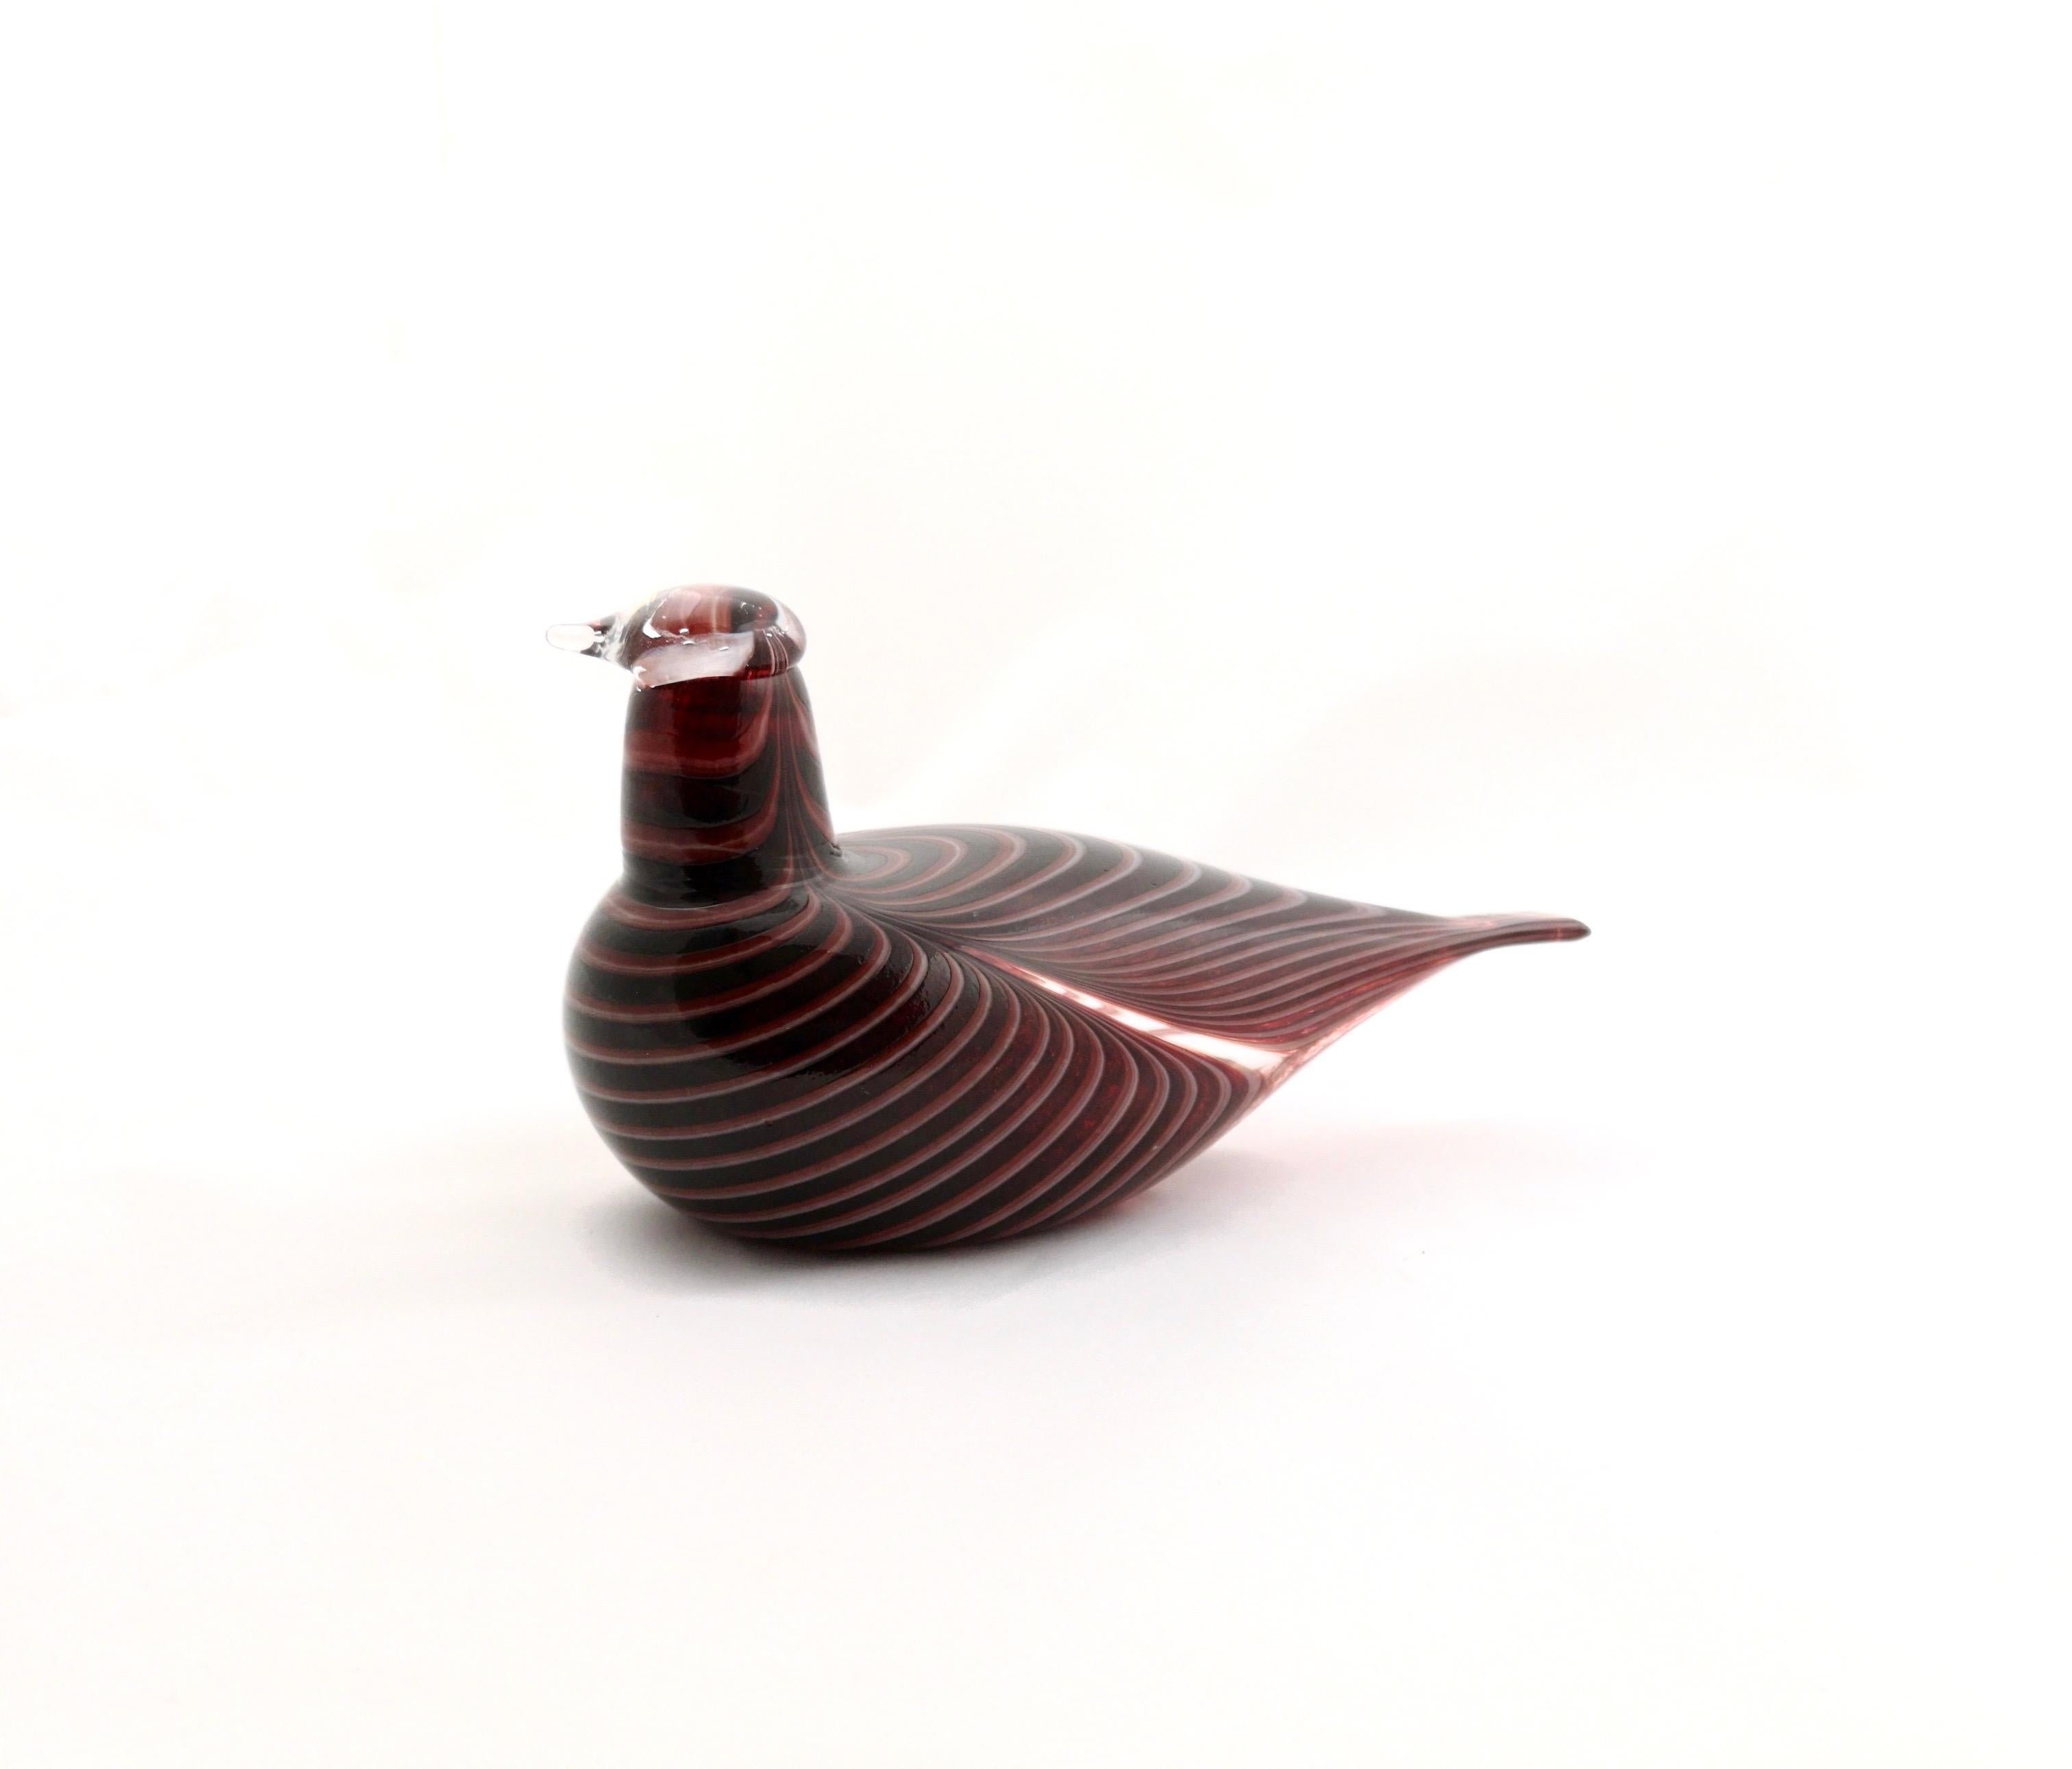 European Ruby Red and Dark Maroon Mouth Blown Glass Bird by Oiva Toikka, 1980s 